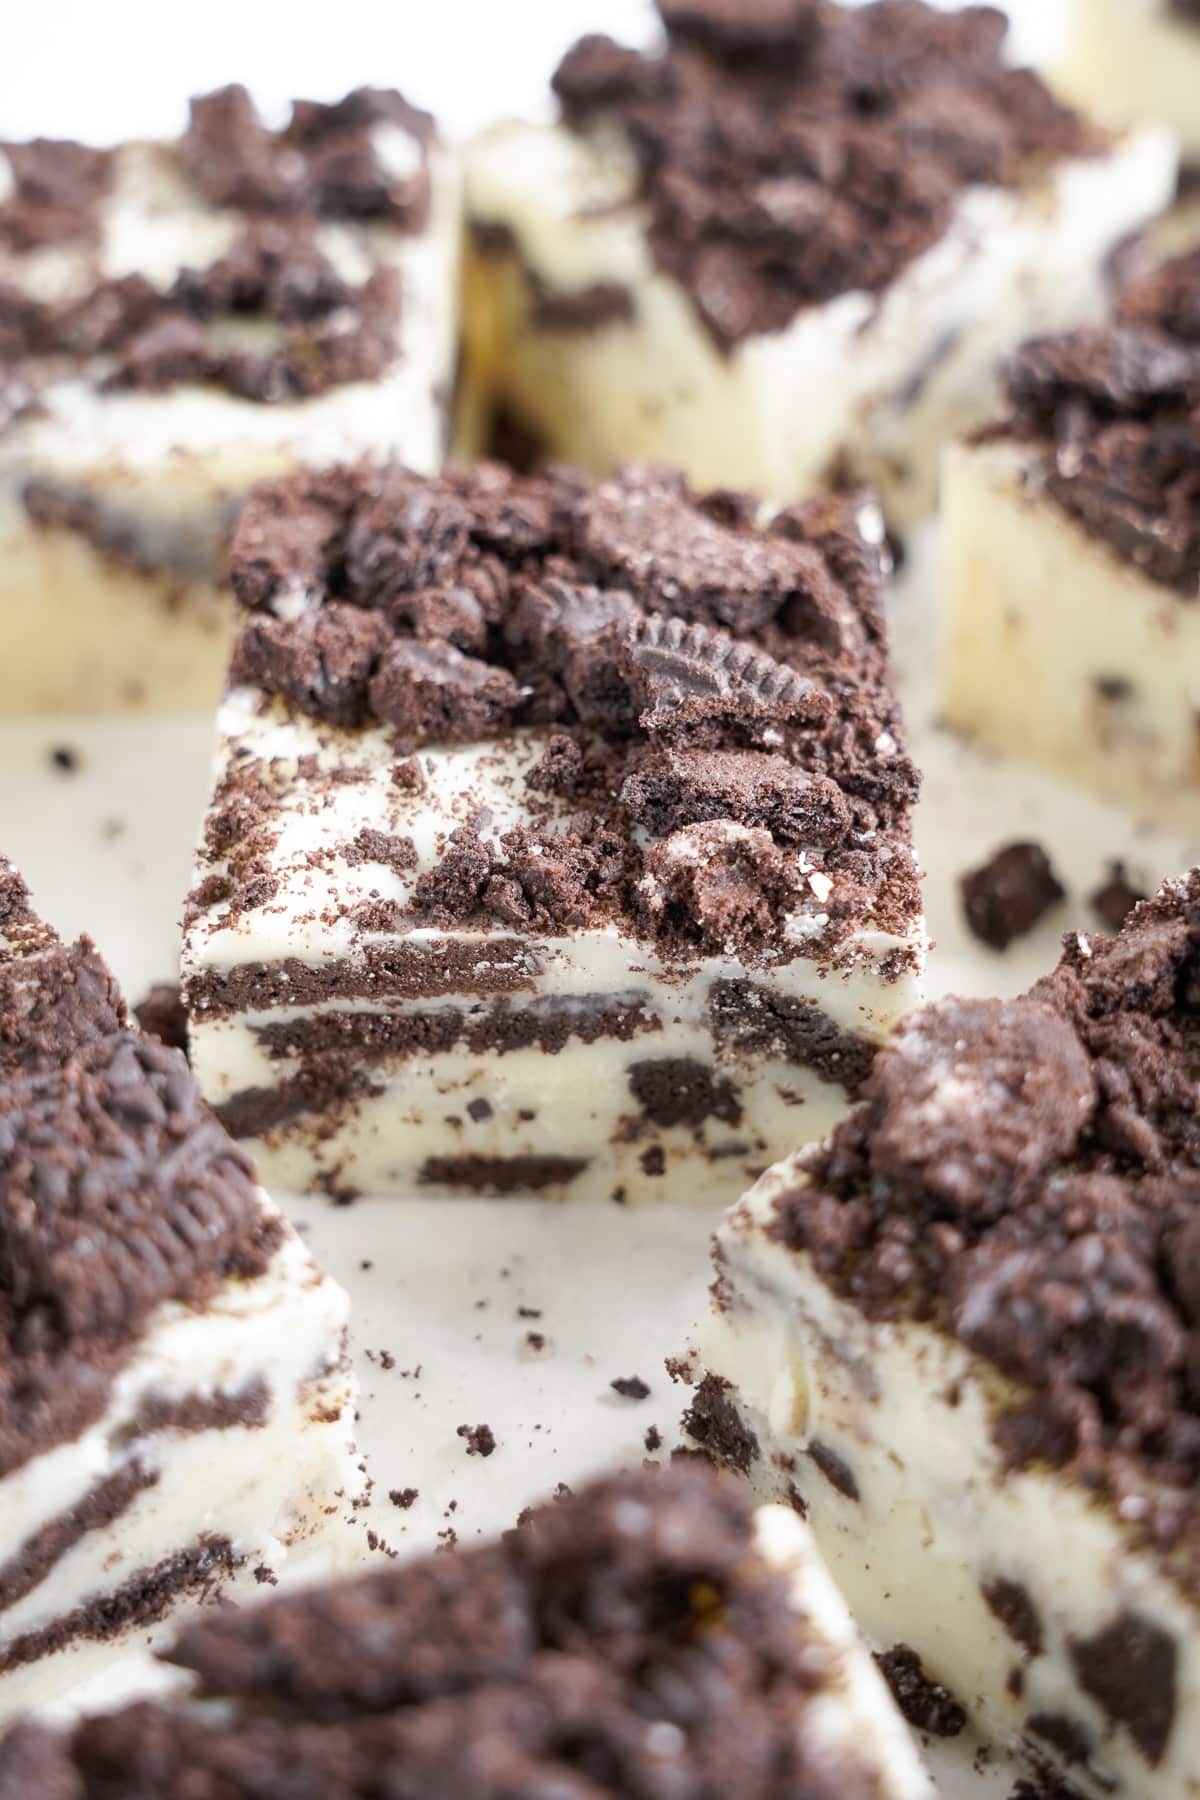 Slices of cookies and cream fudge on the counter form the side with a close up focus on the center piece.